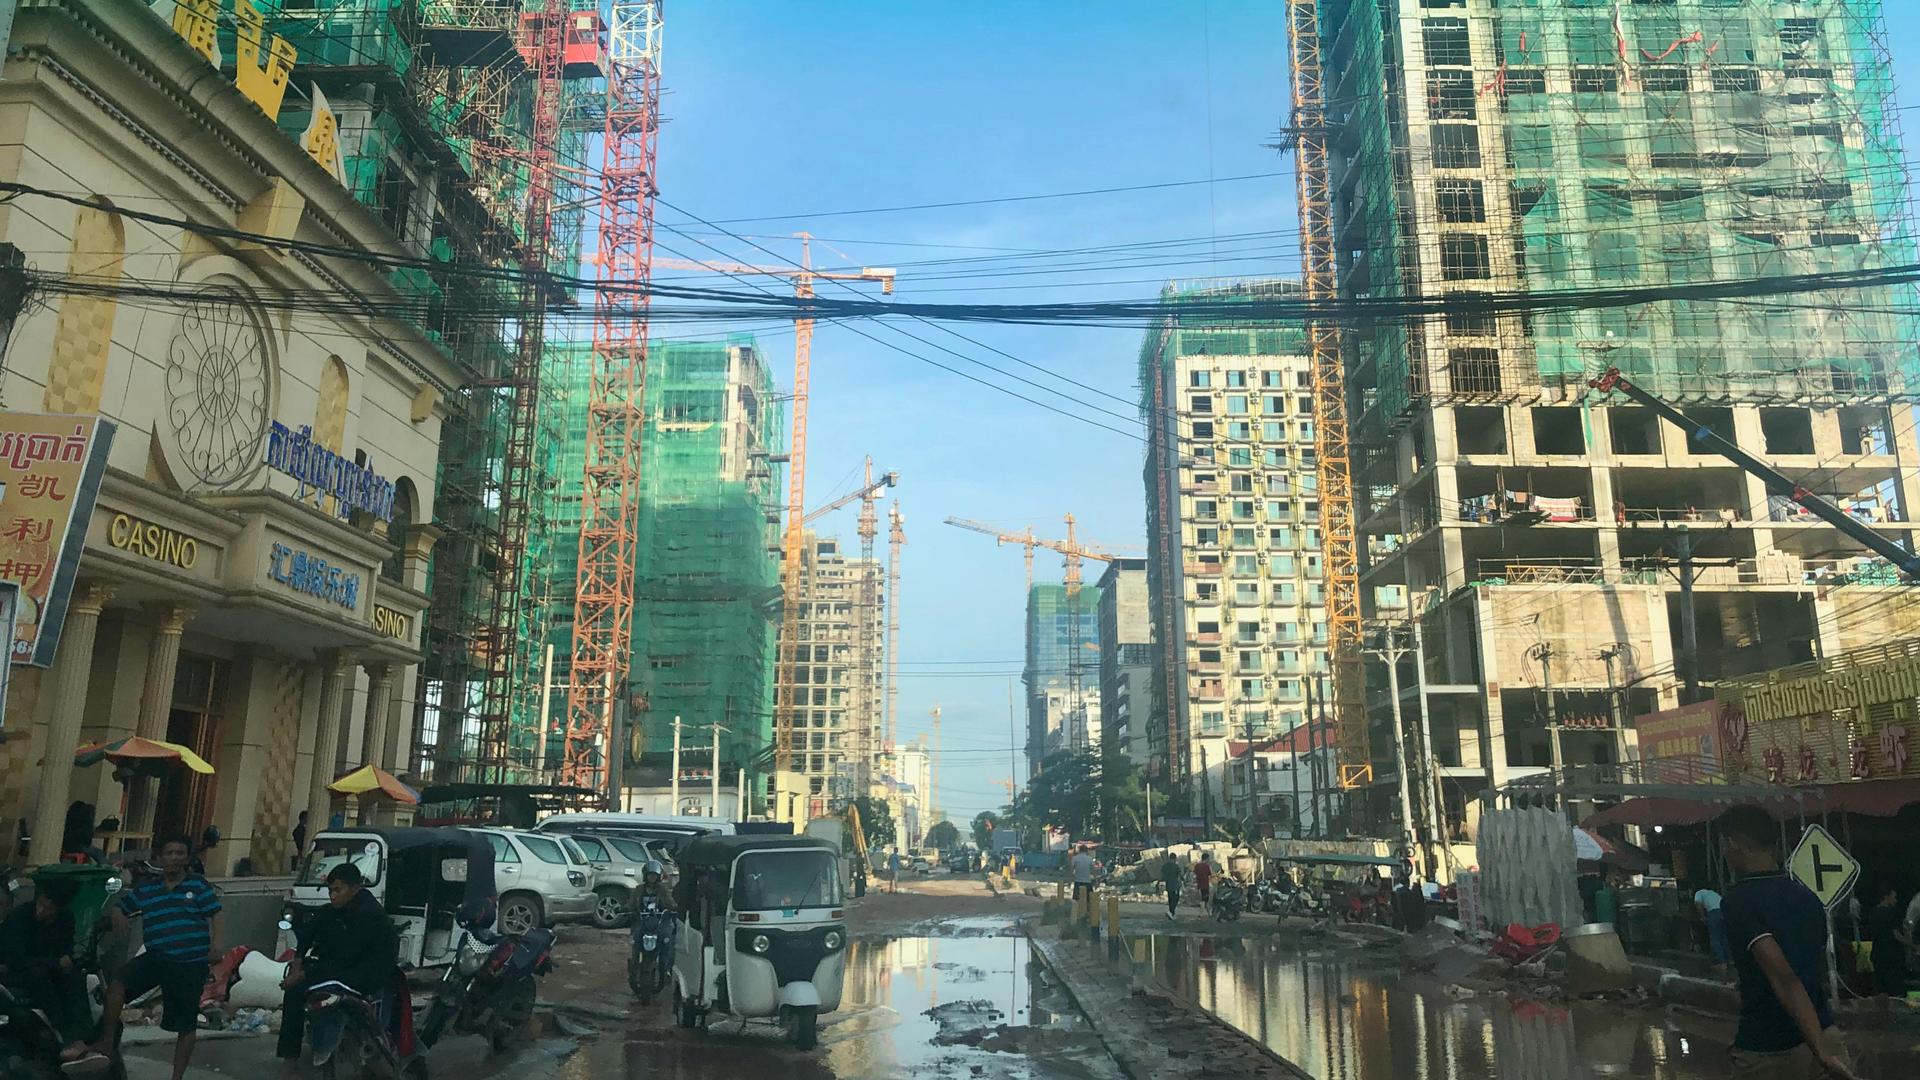 Sihanoukville, Cambodia, has become a construction site in recent years, with dozens of Chinese projects to build business and apartment high-rises, and with roads under construction around town.